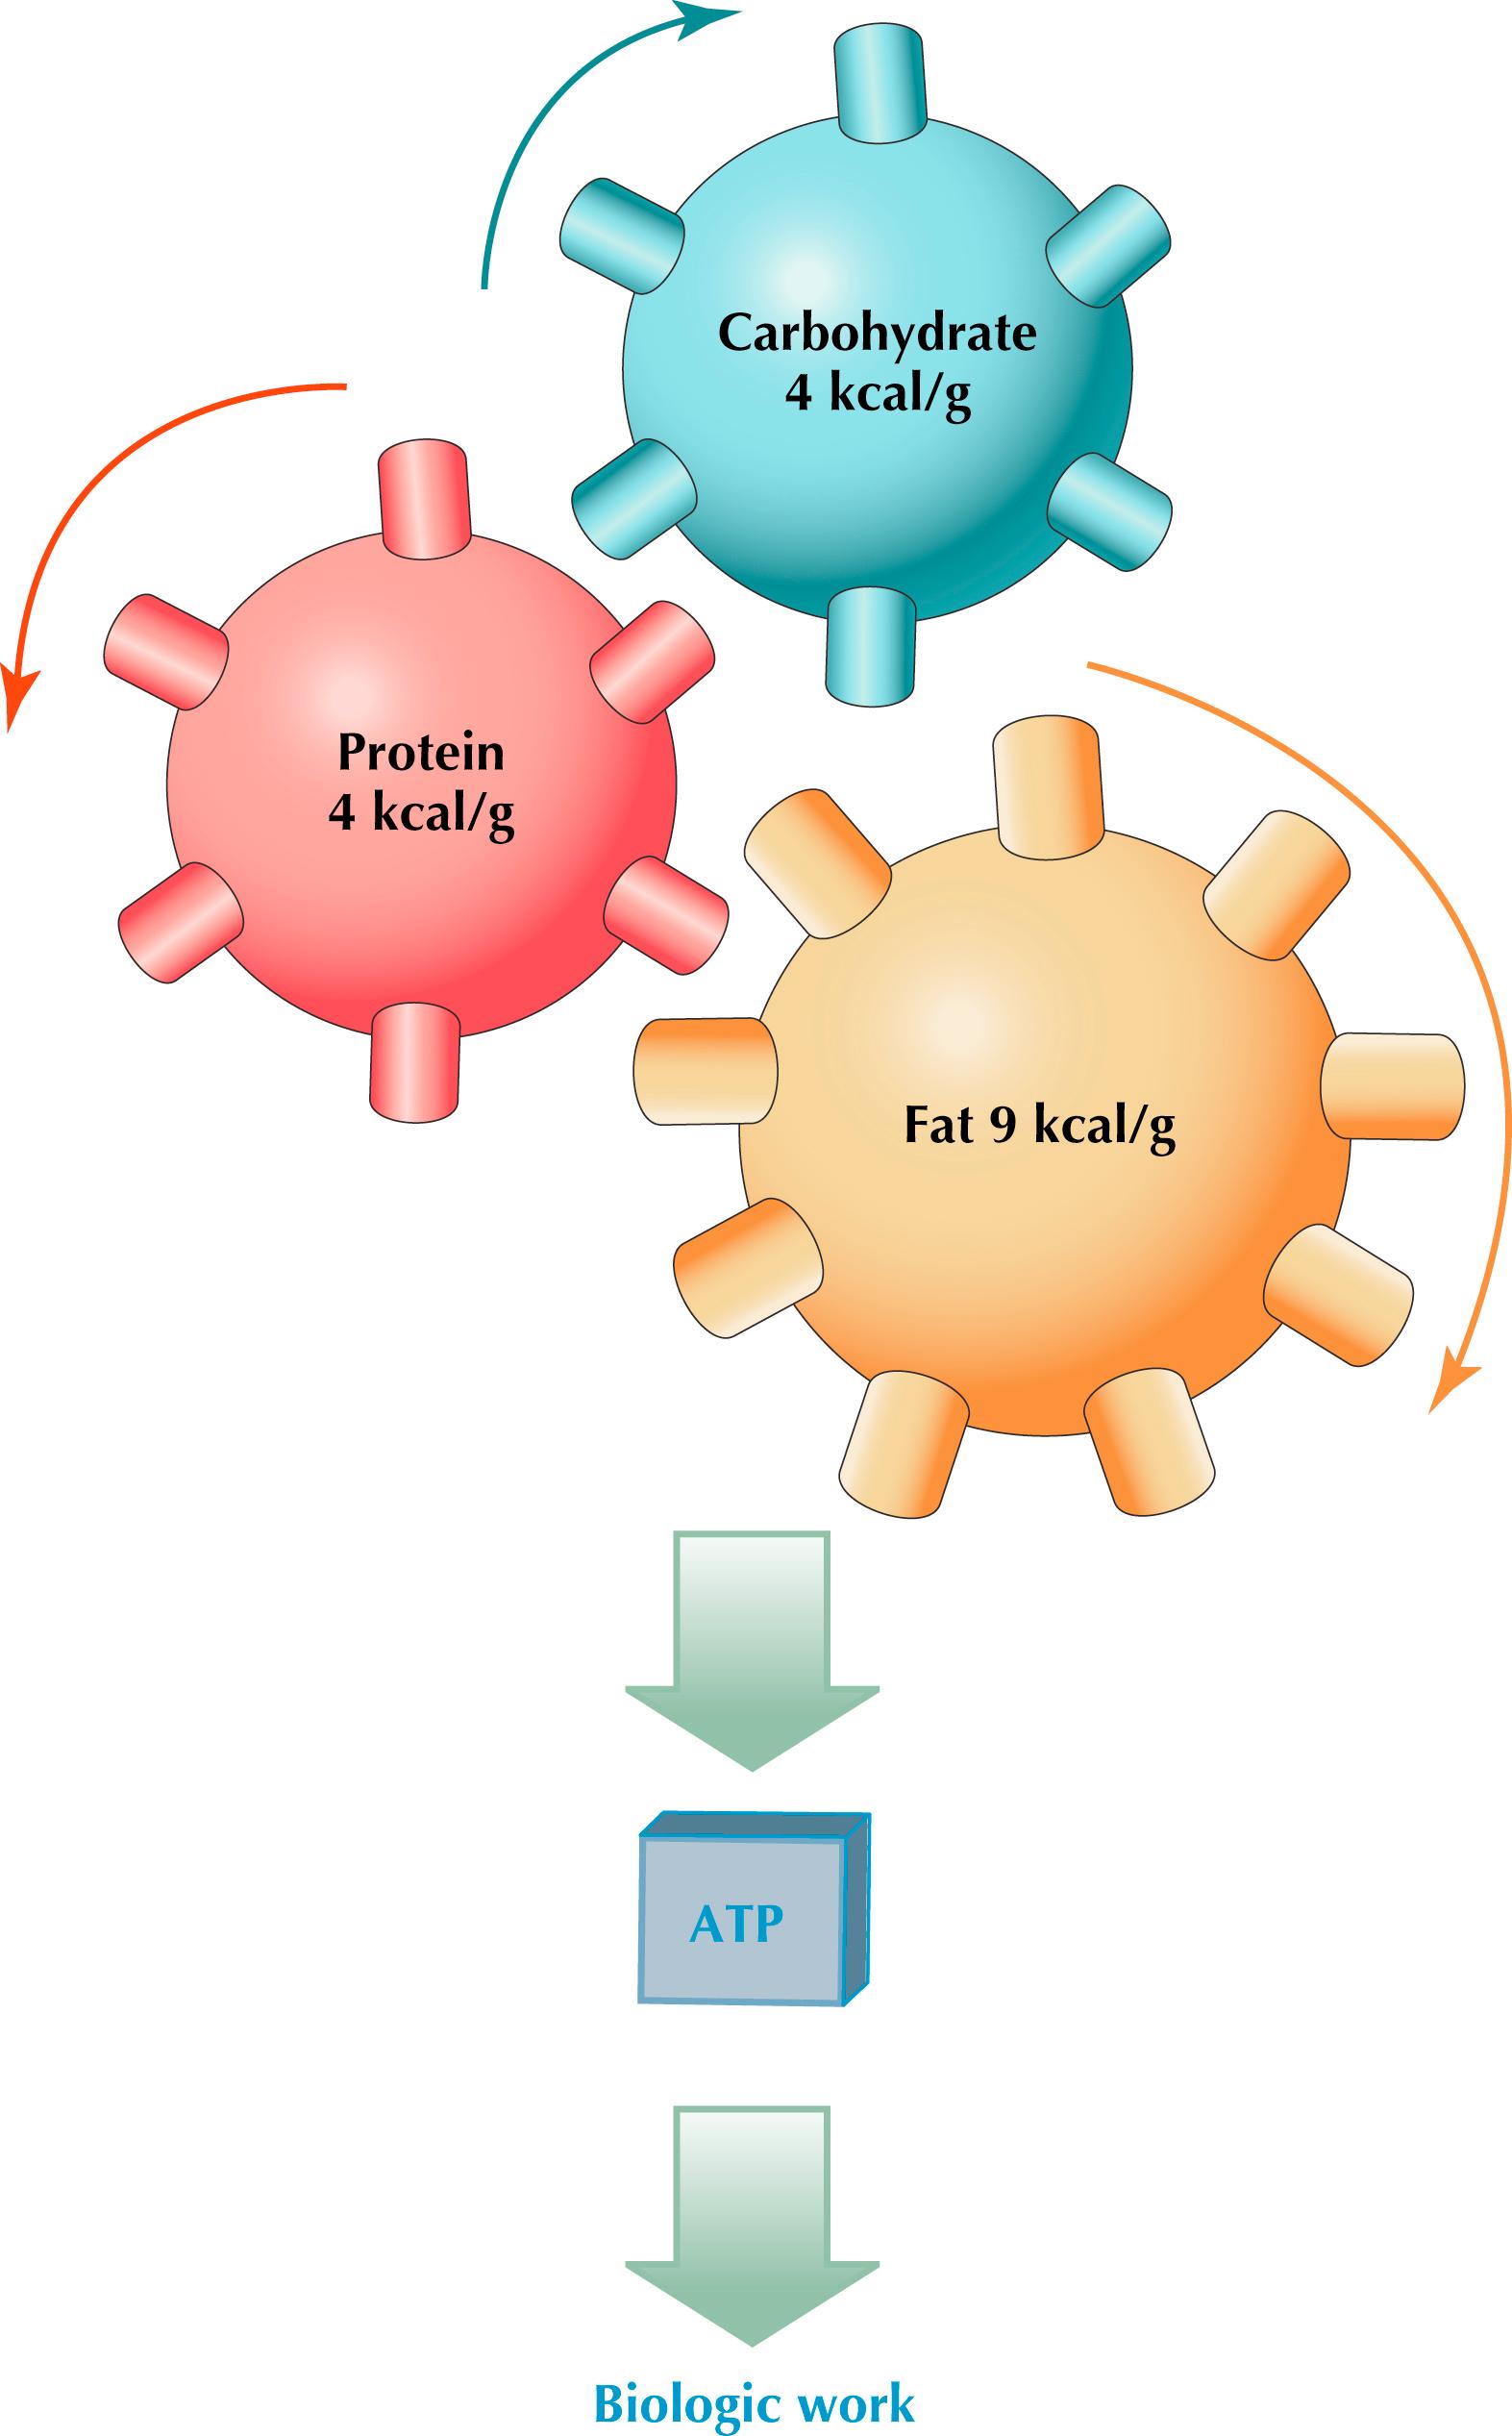 Figure 5.1, Sources of ATP for biologic work. ATP is harvested from macronutrients, carbohydrates, proteins, and fats to synthesize it for biologic work.